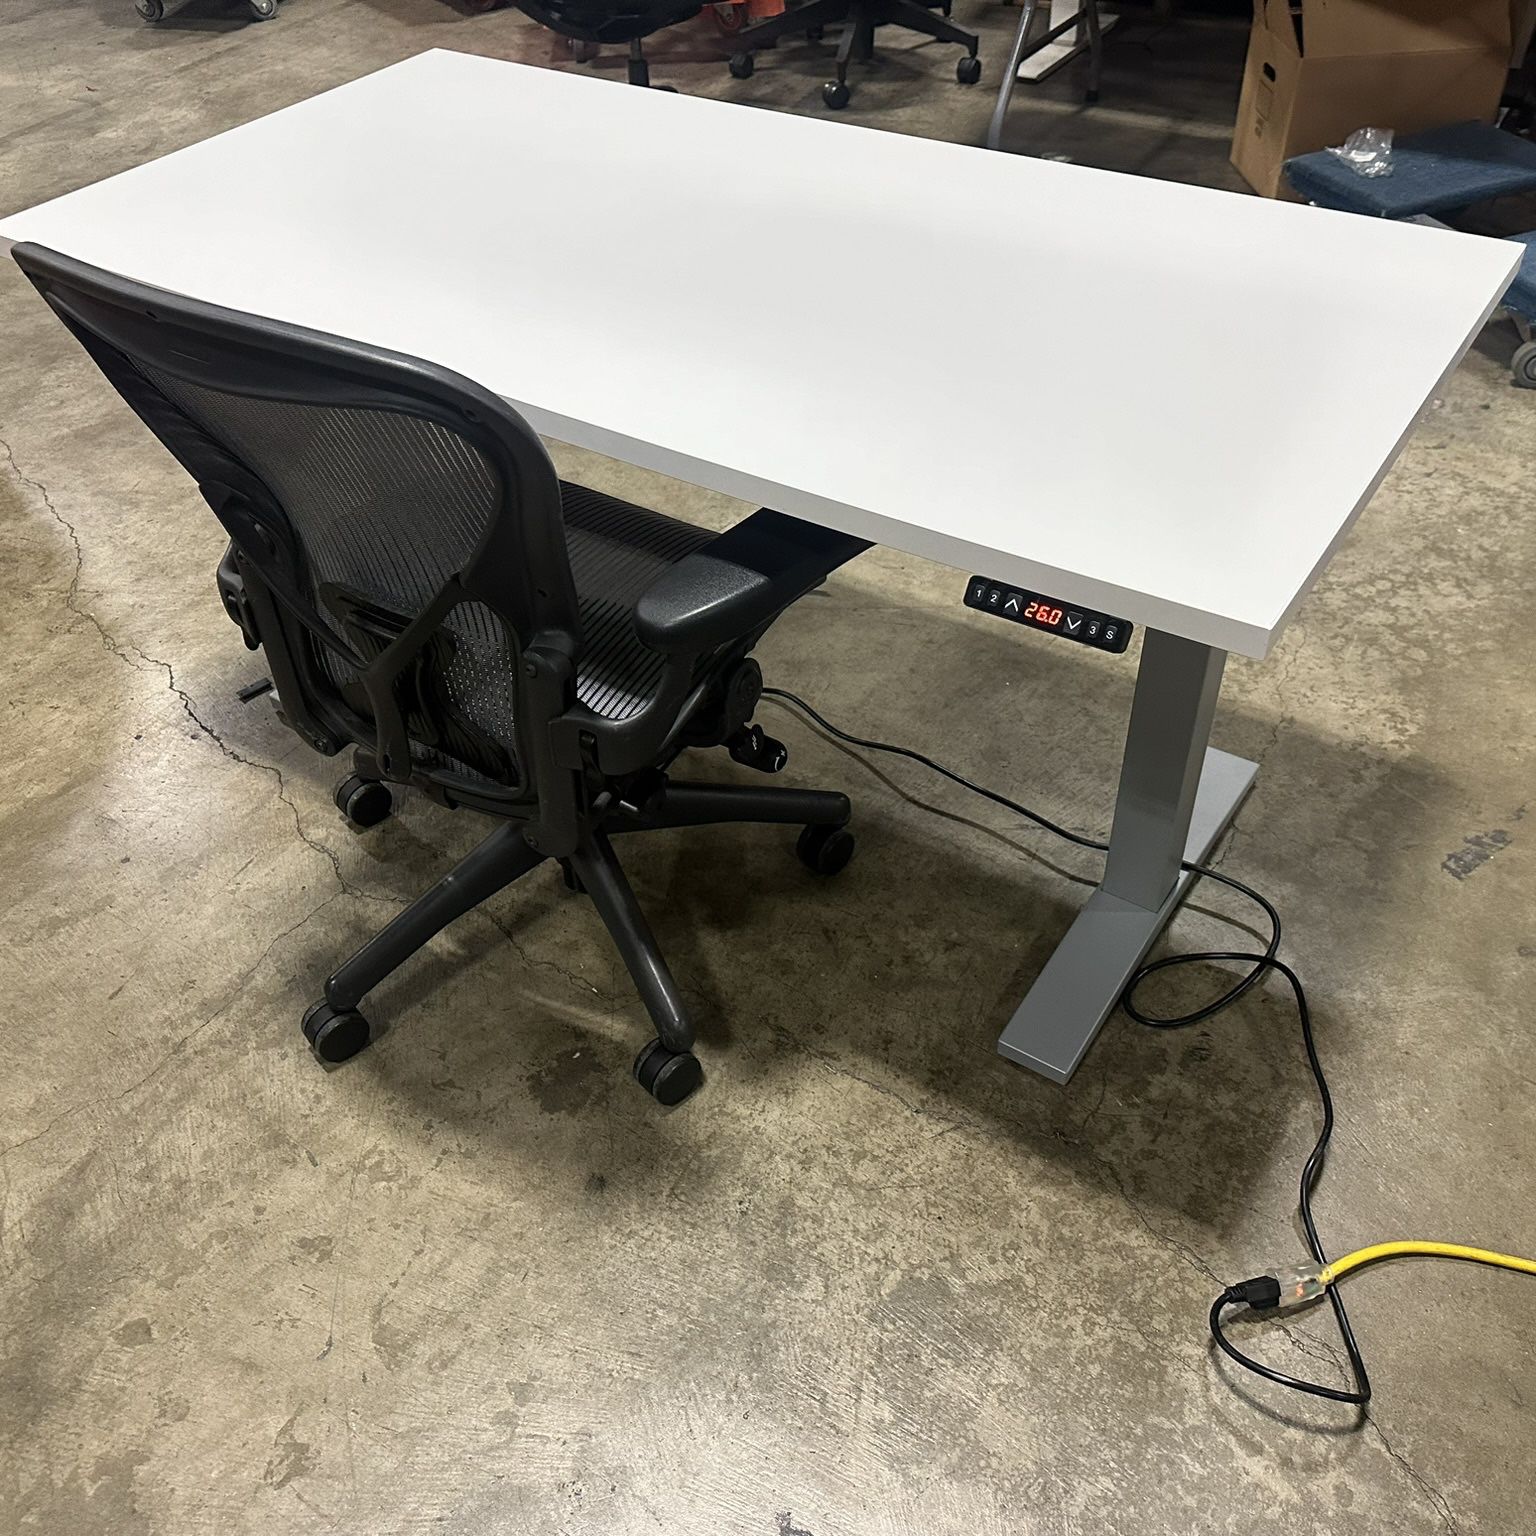 Herman Miller 48” Standing Desks! Electric Height Adjustable Sit Stand Desk! We Also Have Herman Miller Chairs And Monitor Arms!!!